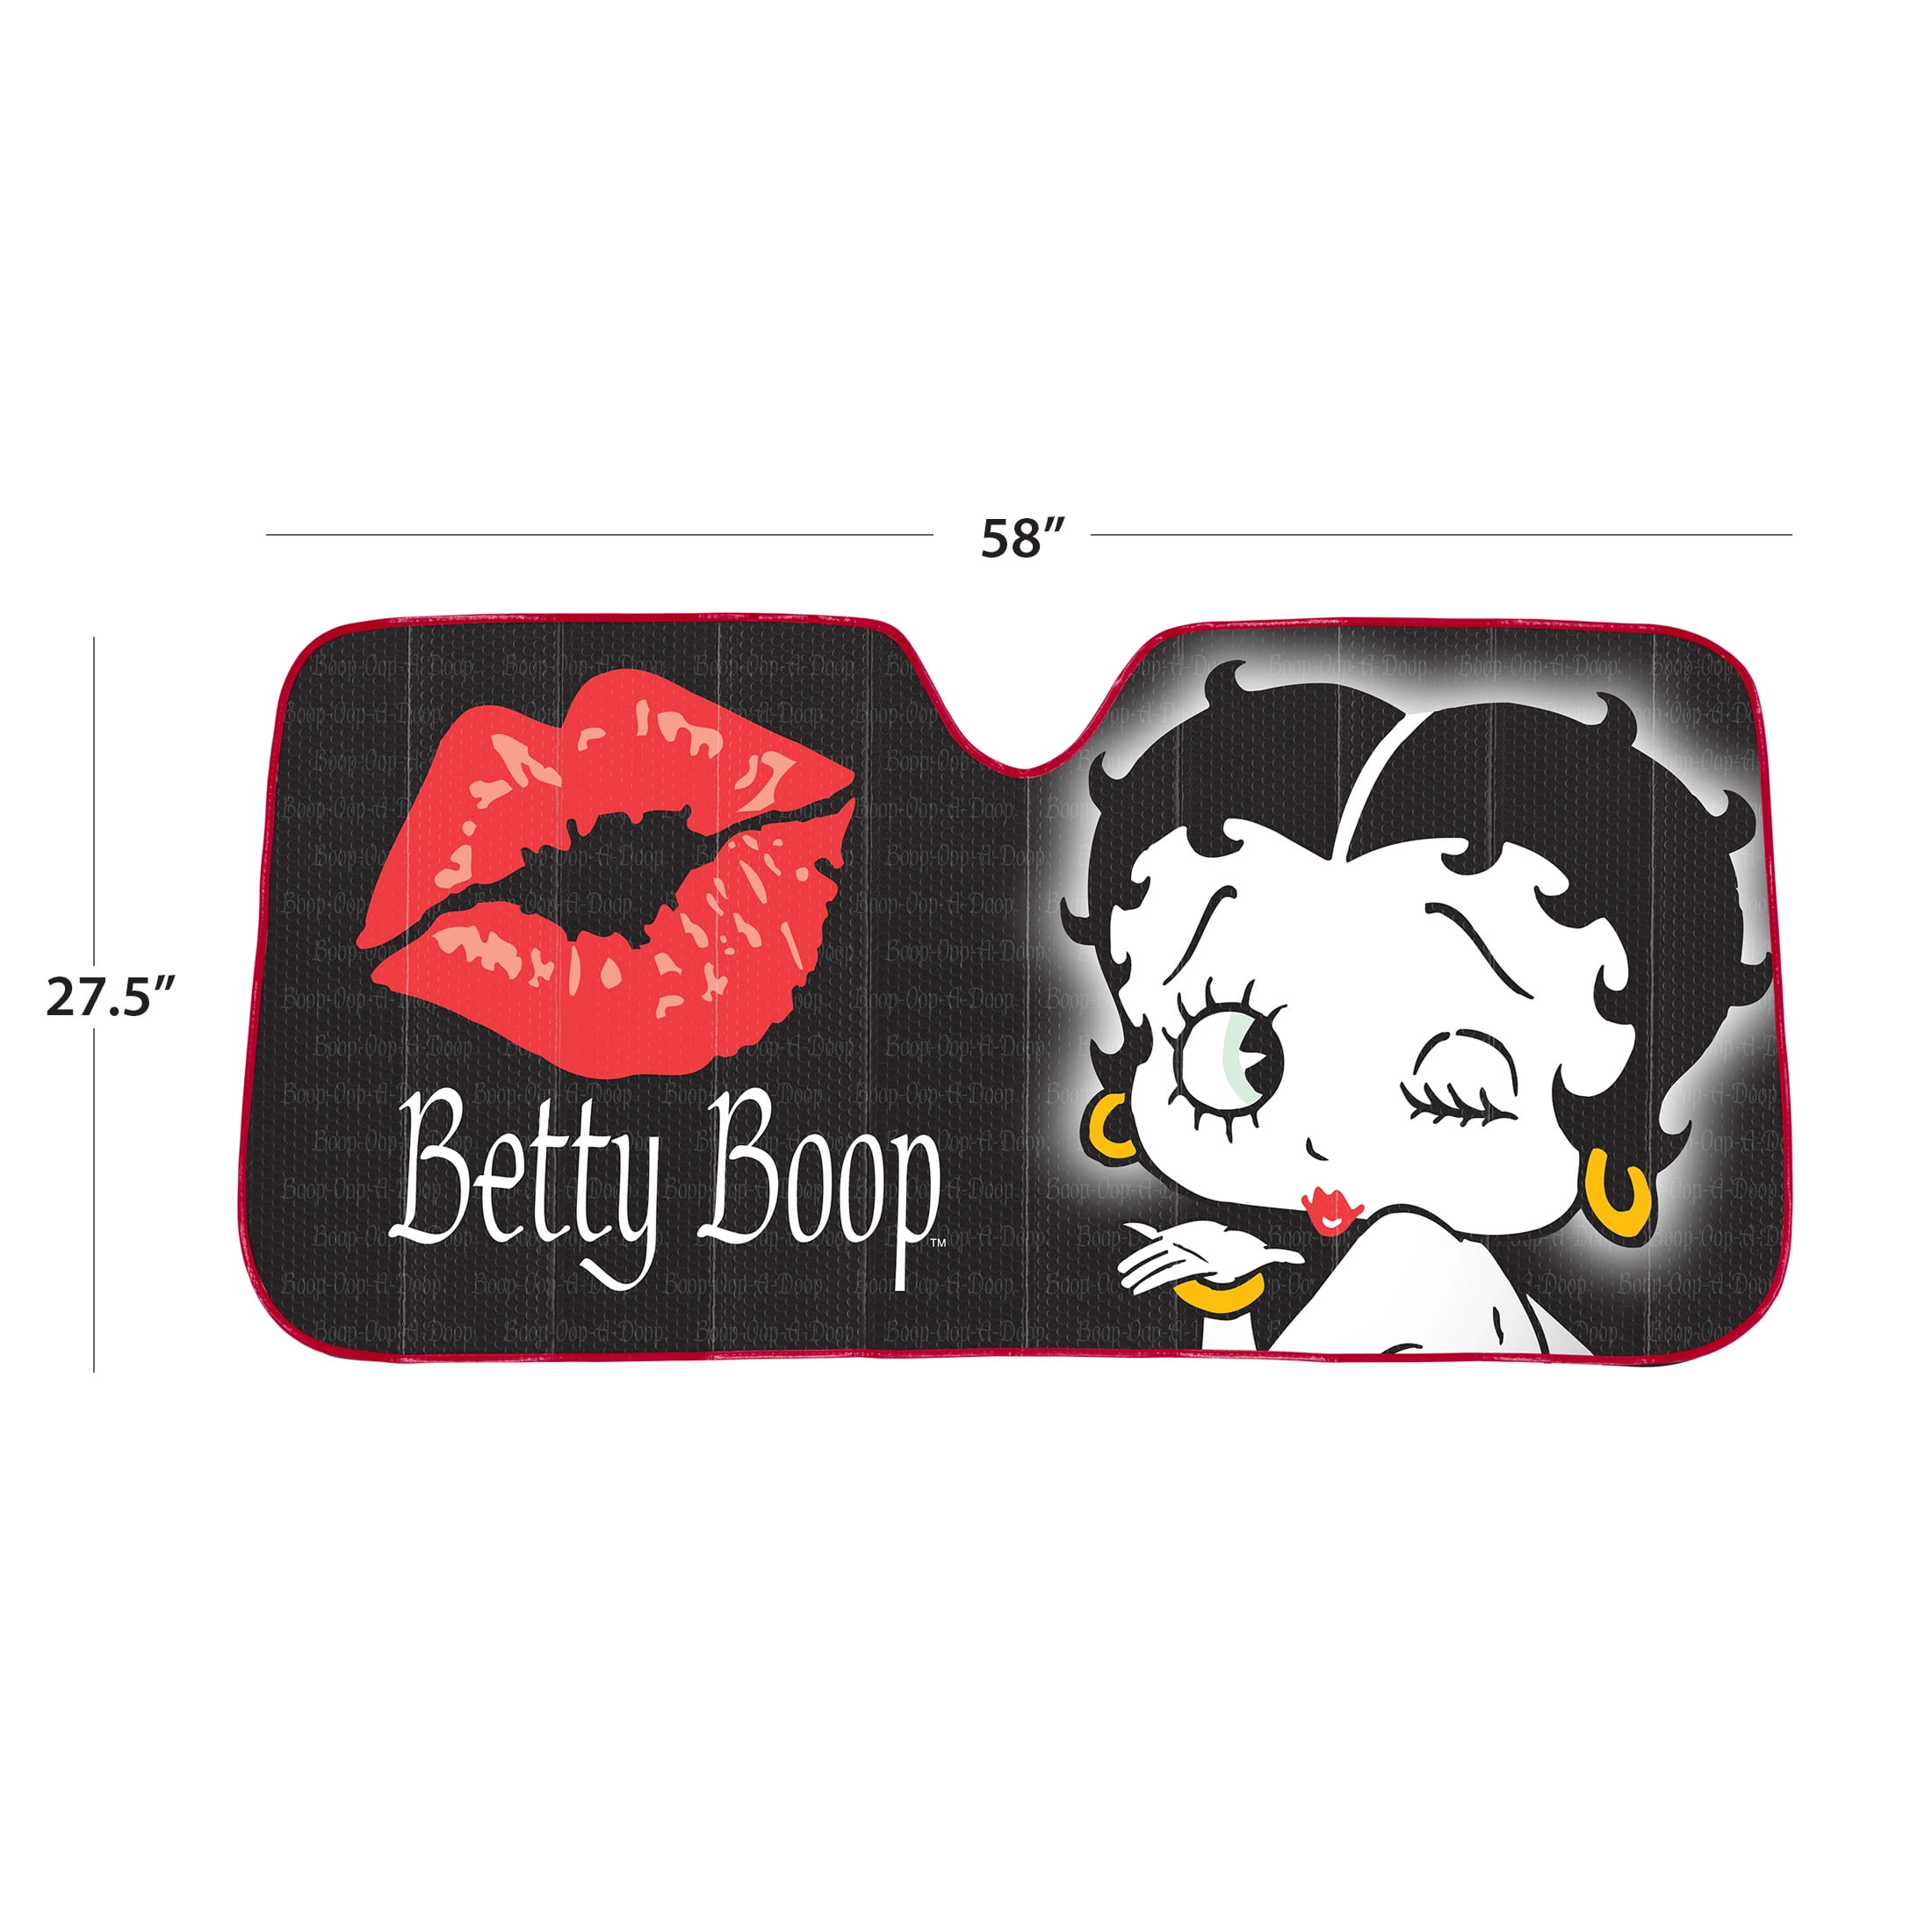 Two Sizes Fit Most Vehicles Block UV Rays Sun Visor Voglimo Betty Boop Foldable Car Sunshades for Windshield Upgraded Graphic Reflective Protector Keep Vehicle Cool 